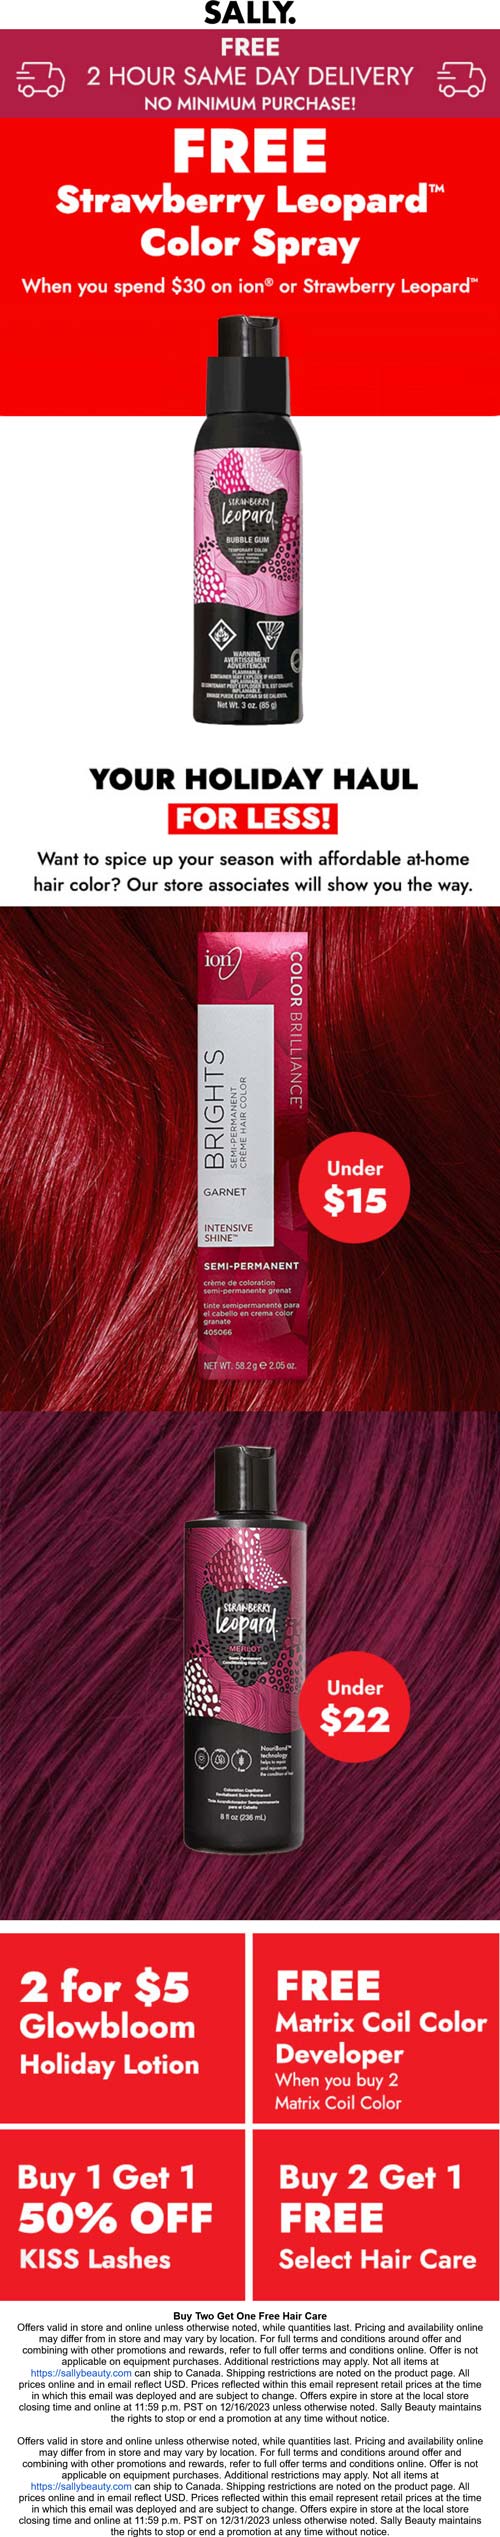 3rd hair care free & free color spray on $30 ion or strawberry leopard at Sally #sally